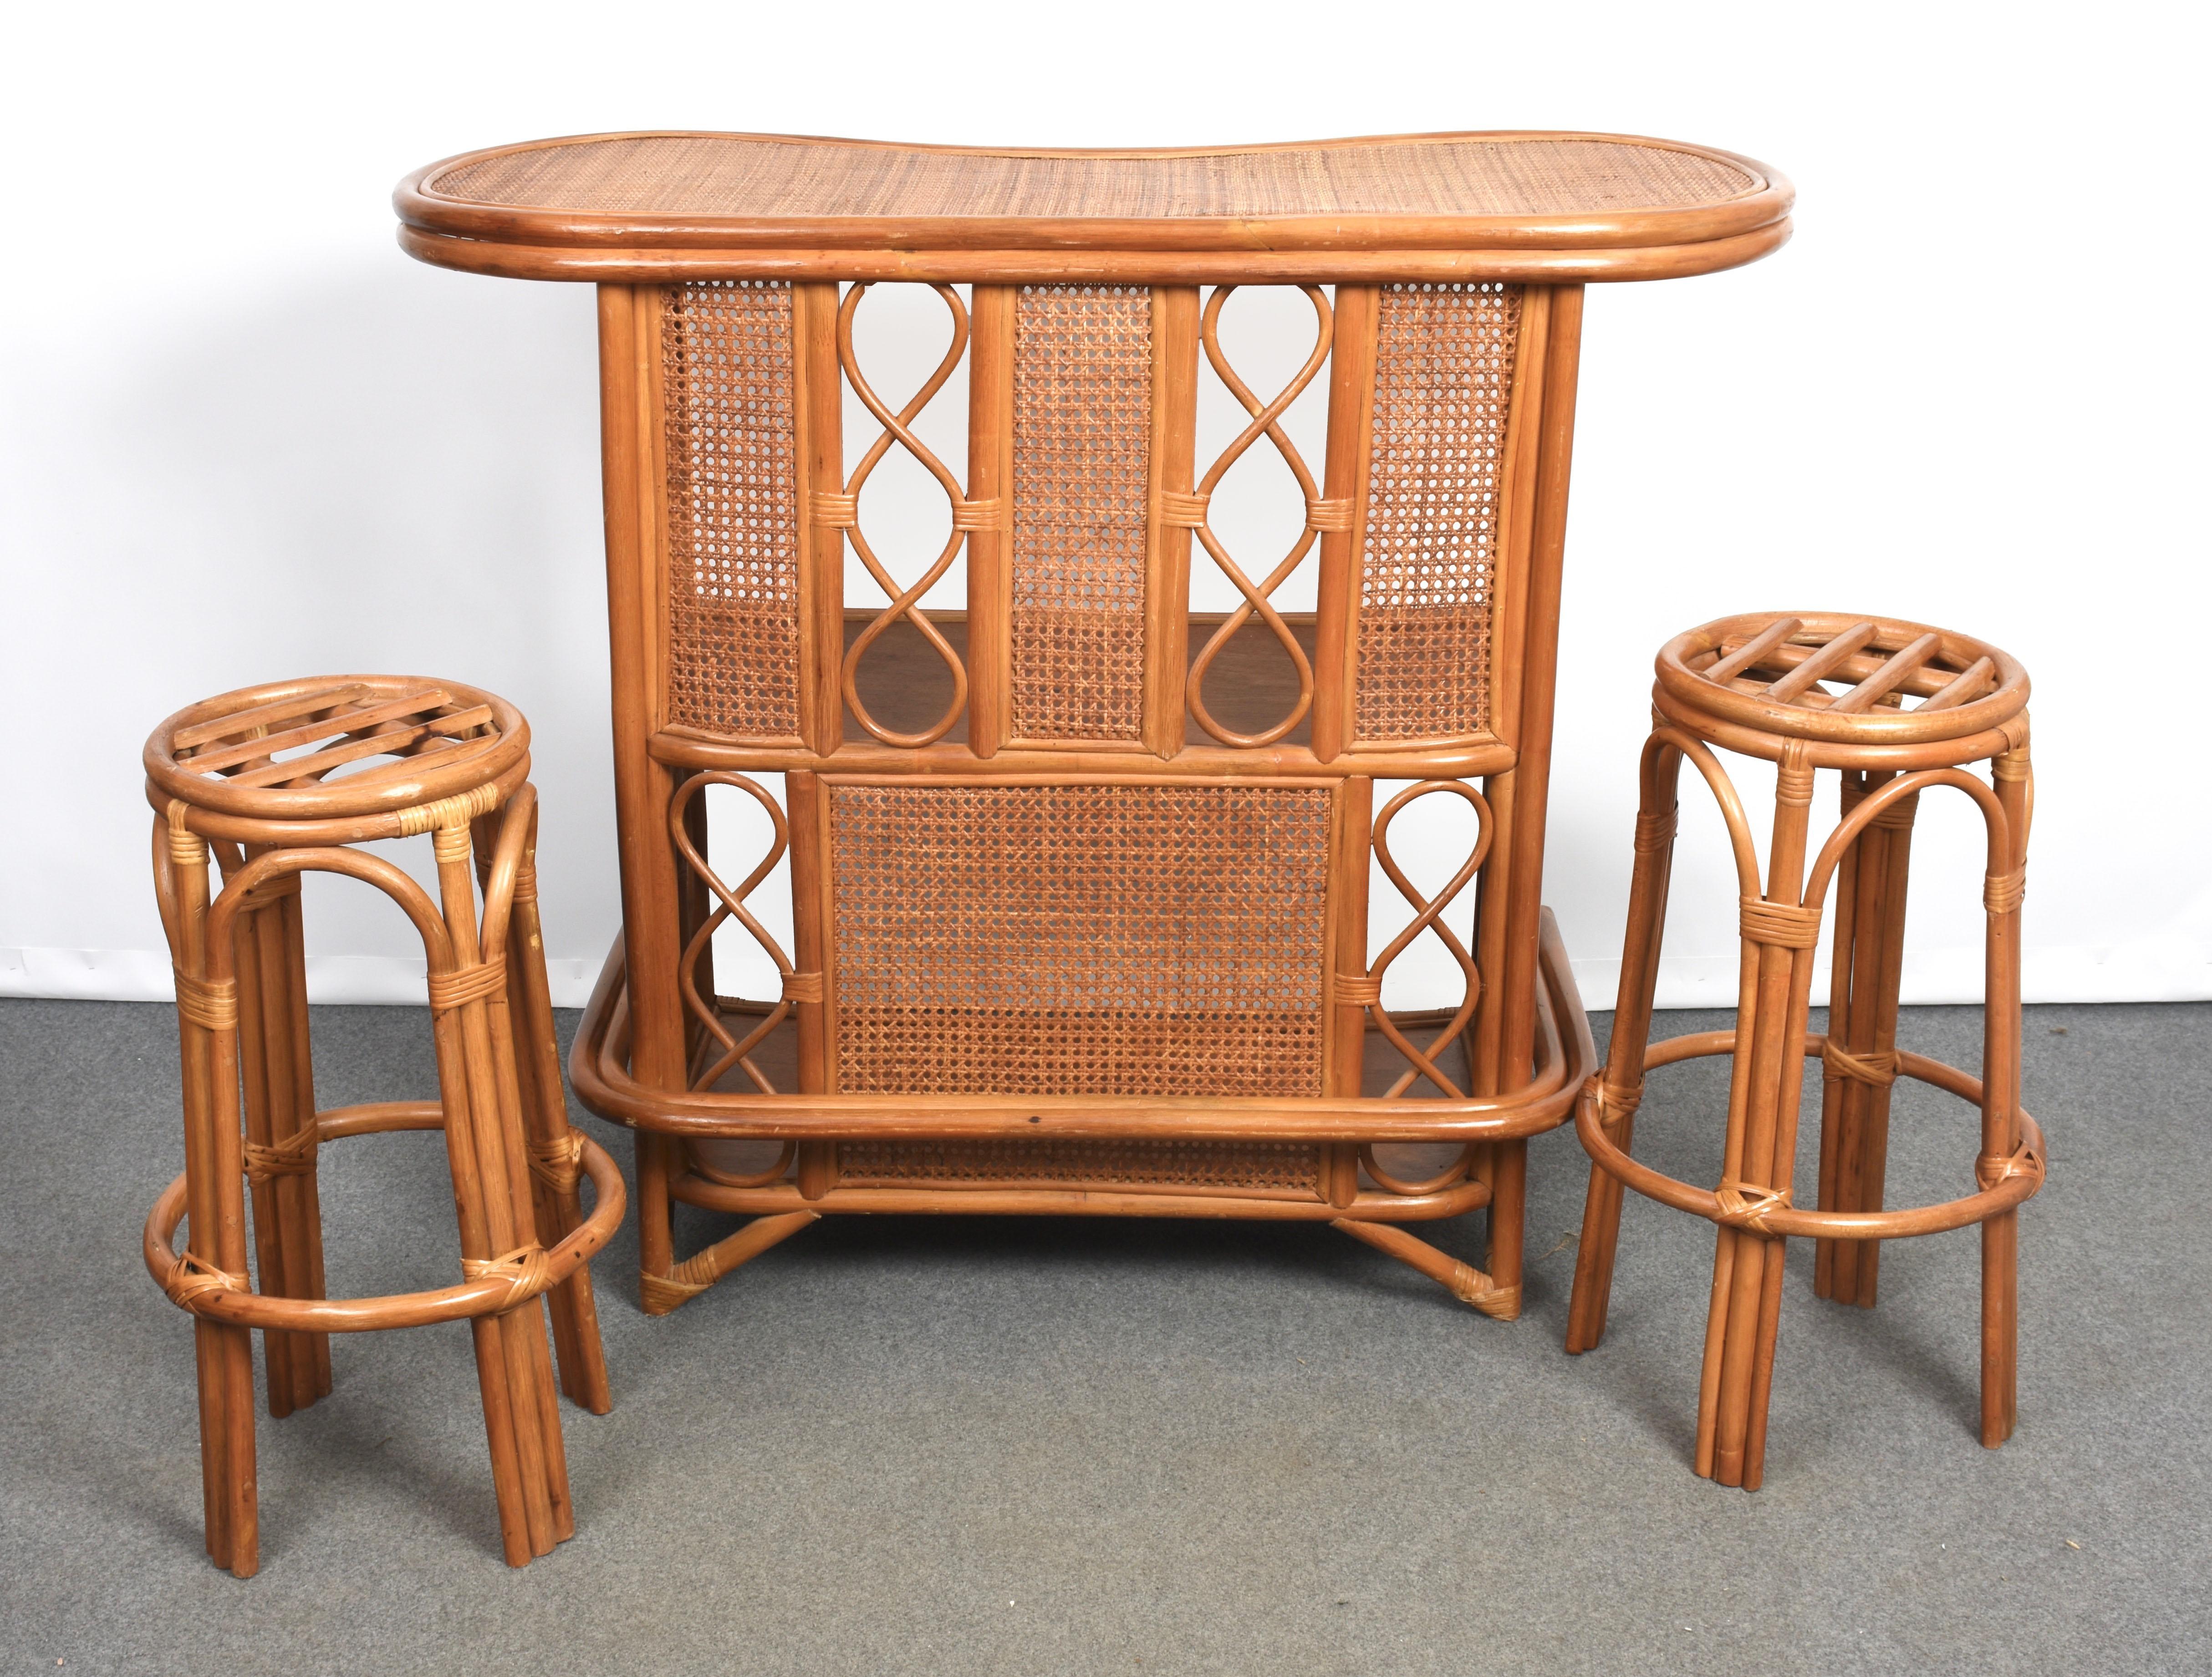 Amazing midcentury Wien rattan dry bar with two stools with double arch support. This spectacular set was produced in Italy during the 1960s.

This bar counter has two internal wooden shelves, is in good vintage conditions. Pillows are not